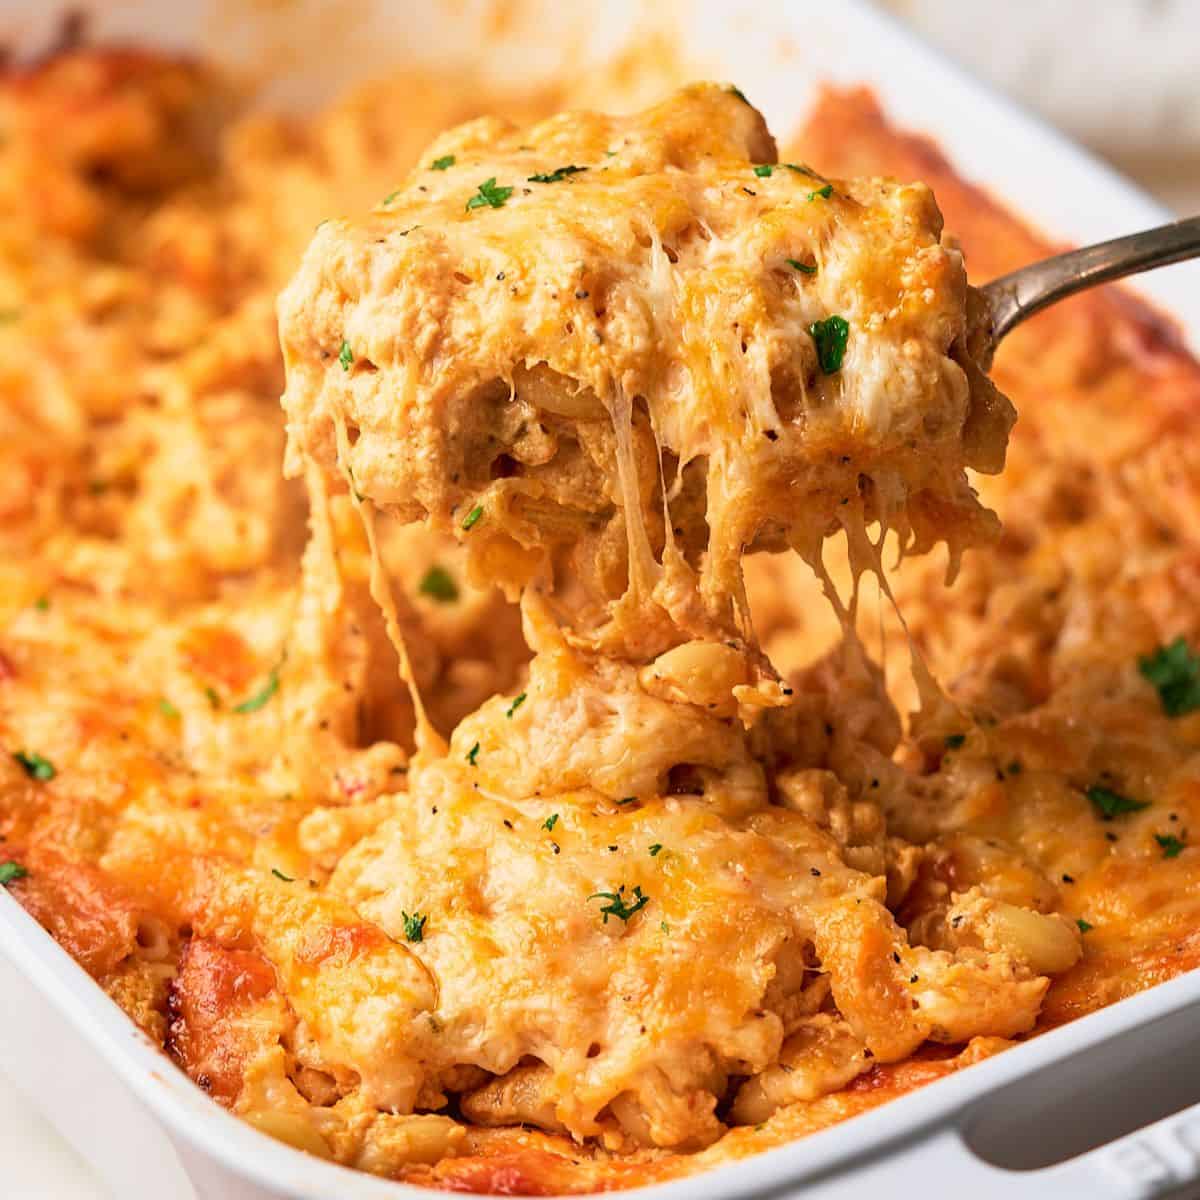 Delicious gooey southern baked mac and cheese being pulled up by a spoon from a casserole.